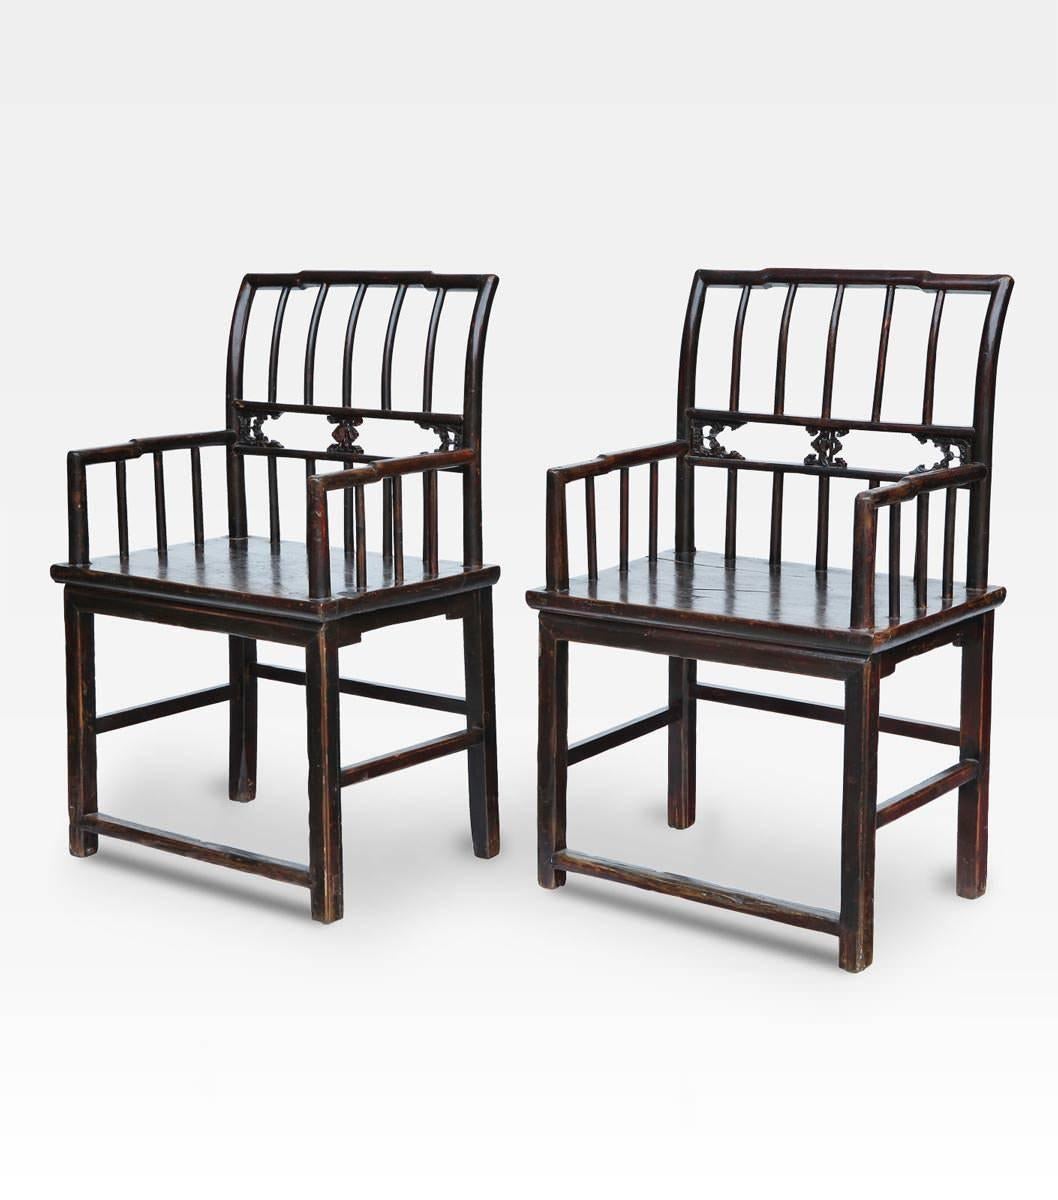 Beautiful set of six Chinese chairs. The minimal design, clean lines bring immediately at ancient imperial courts. At the center of the backrest vertical lines are interrupted by a flowery frieze which represents a man or a woman in a scene of rural